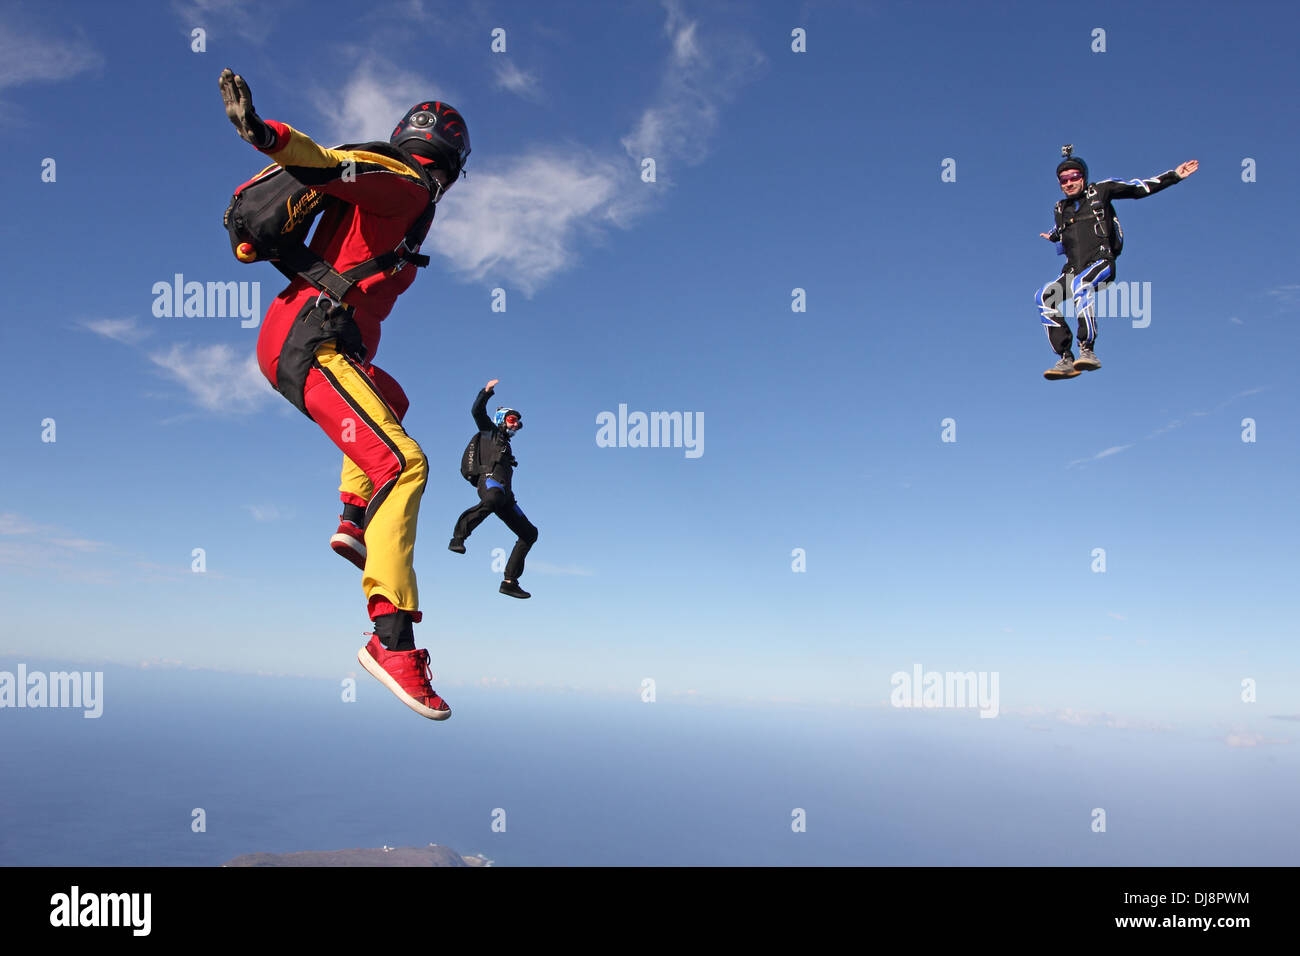 This freefly skydive team is training together for the next competition. It is fun for all to fly free in the blue sky. Stock Photo